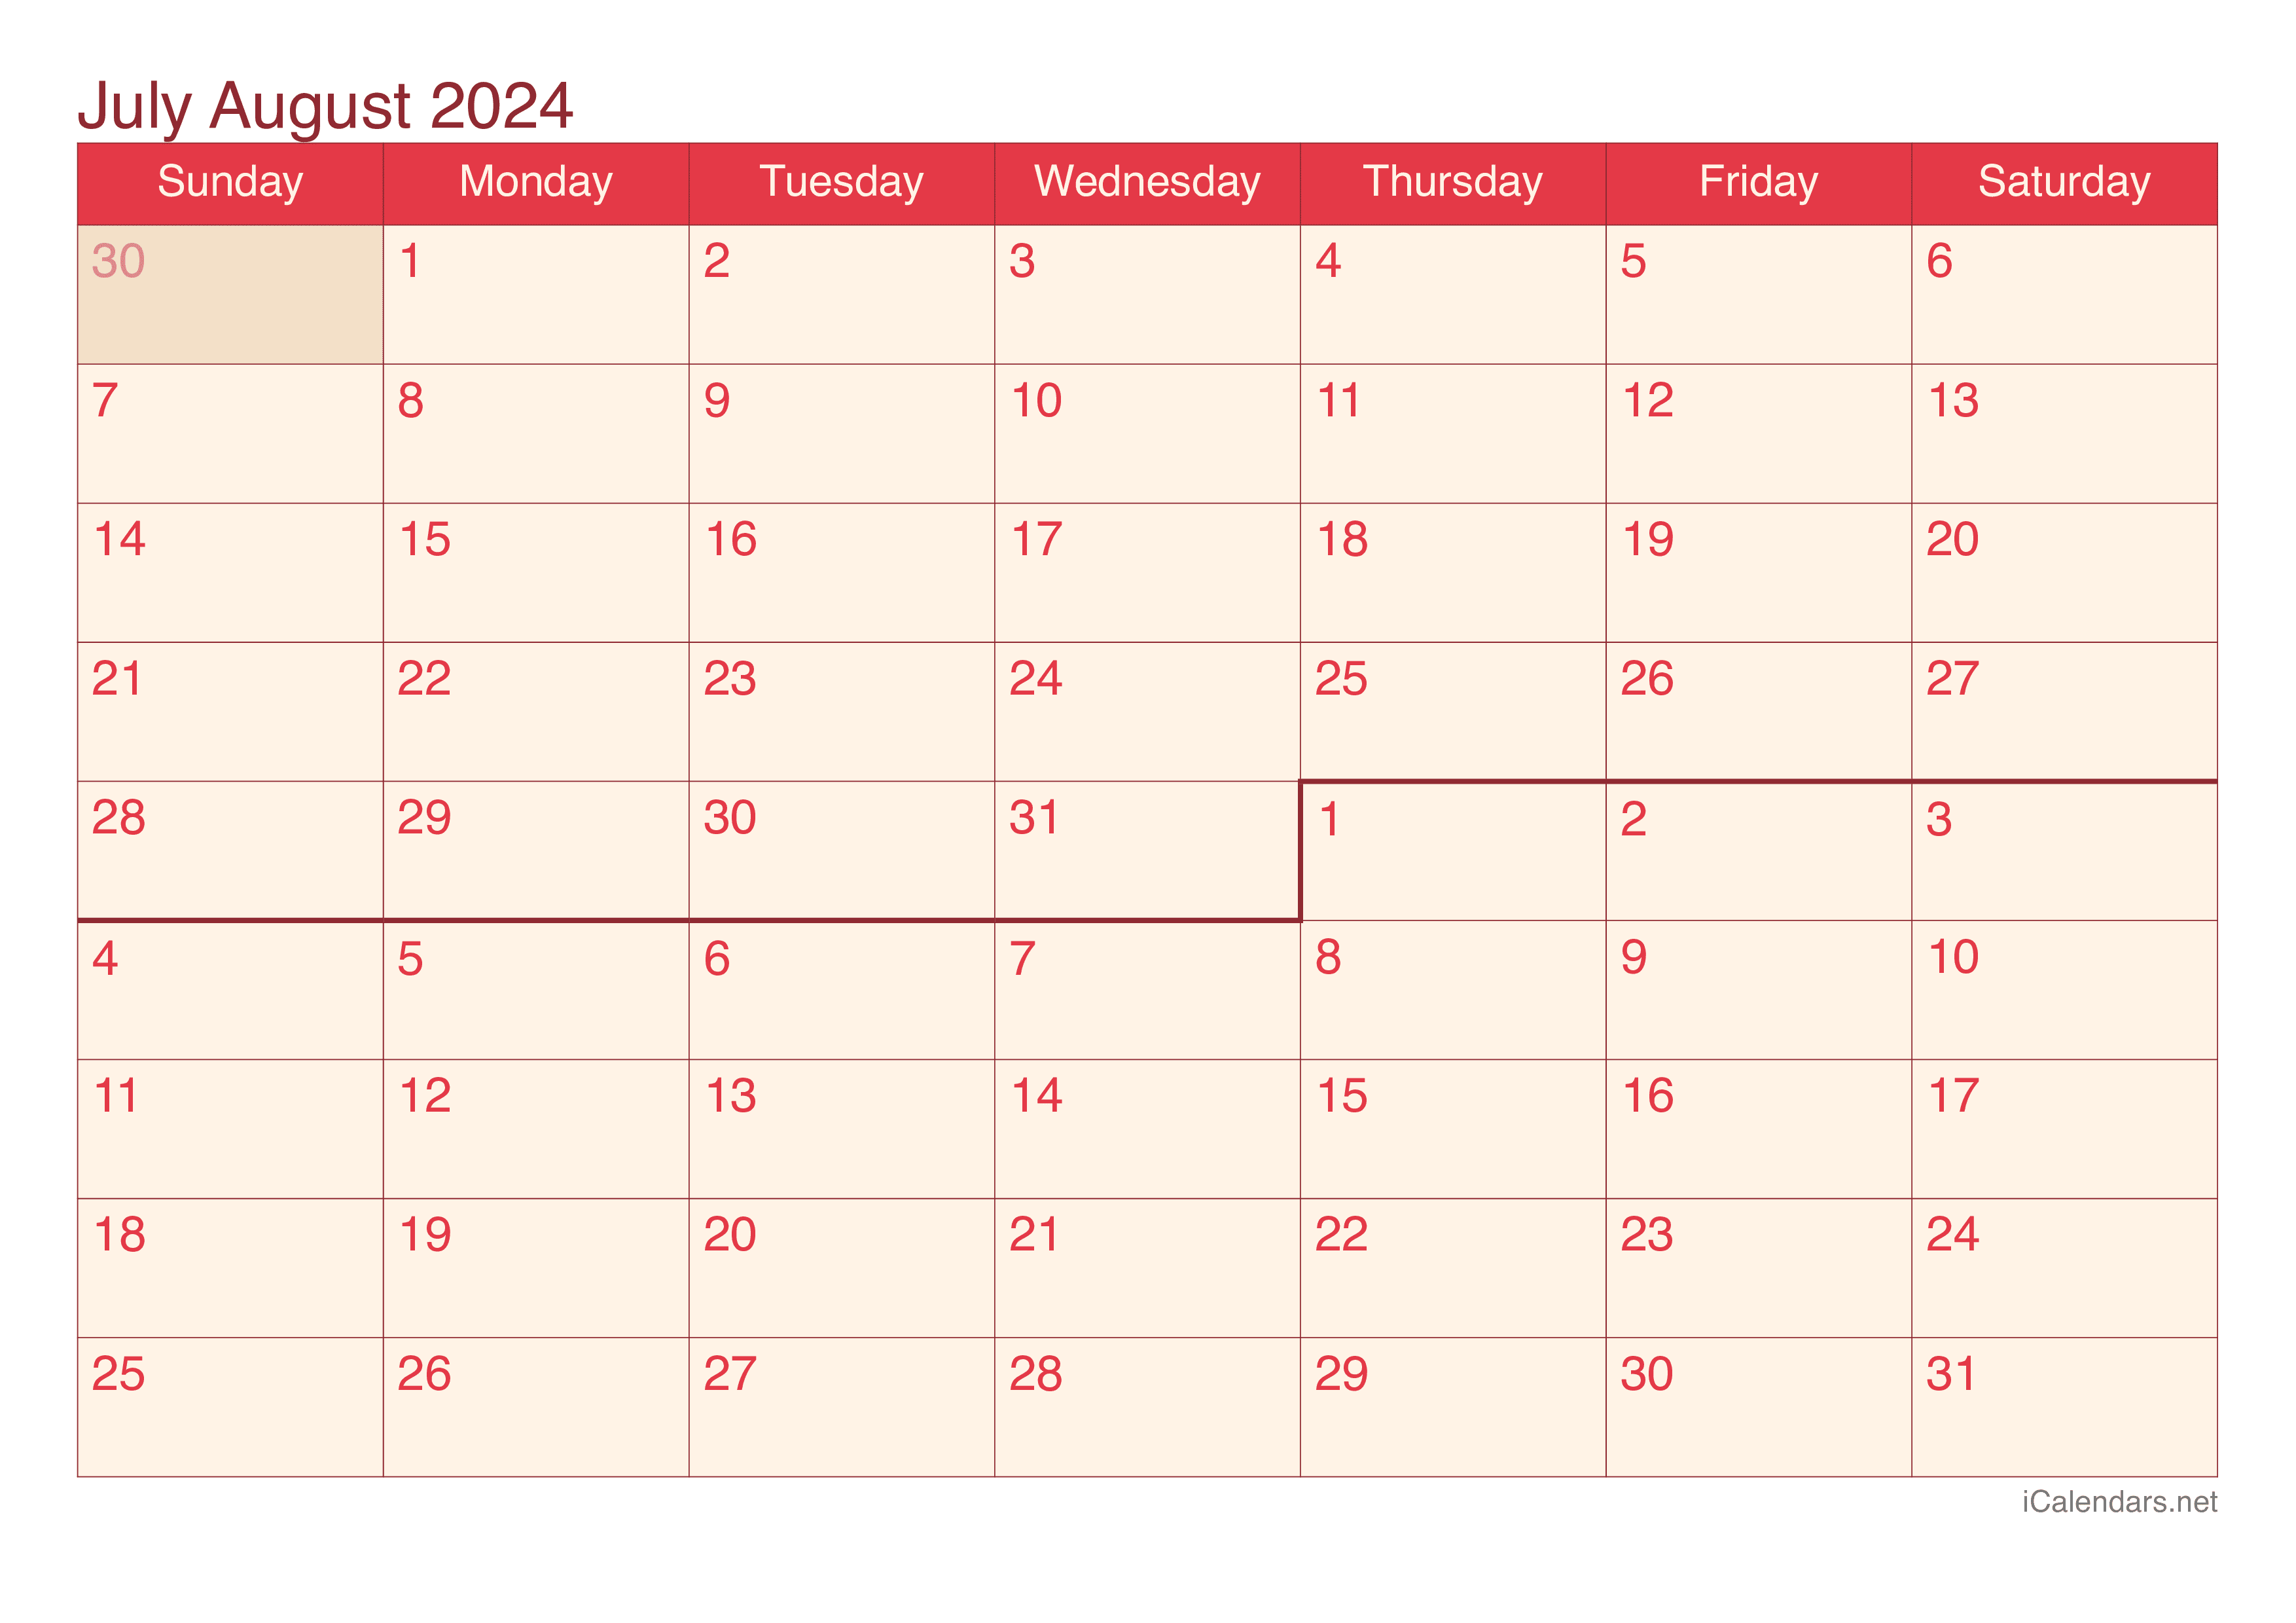 July And August 2024 Printable Calendar within Calendar For the Month of July and August 2024